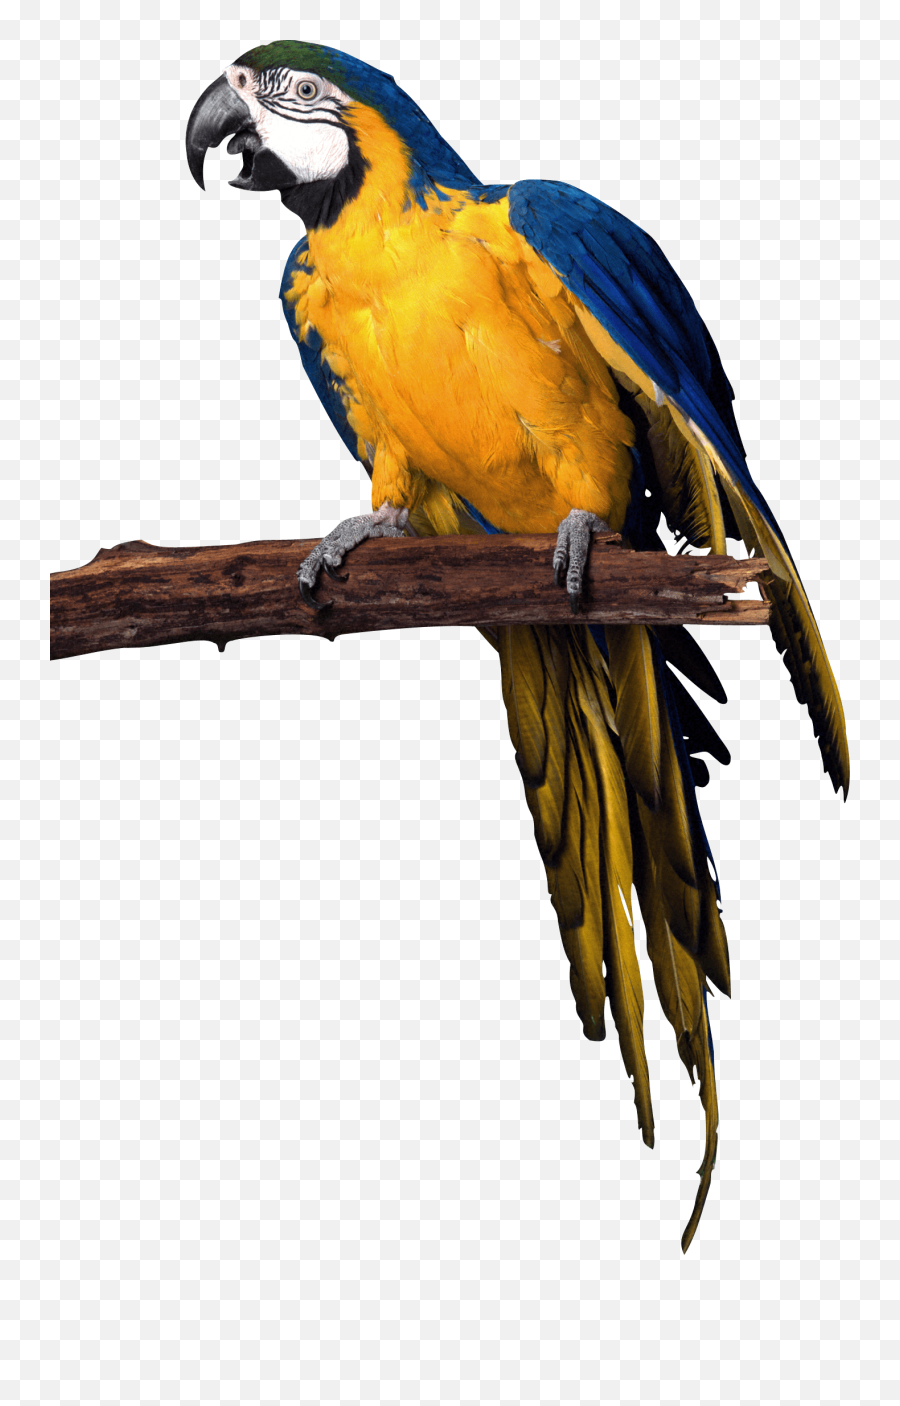 Yellow Blue Pirate Parrot Png Image - Transparent Background Parrots Png,Parrot Transparent